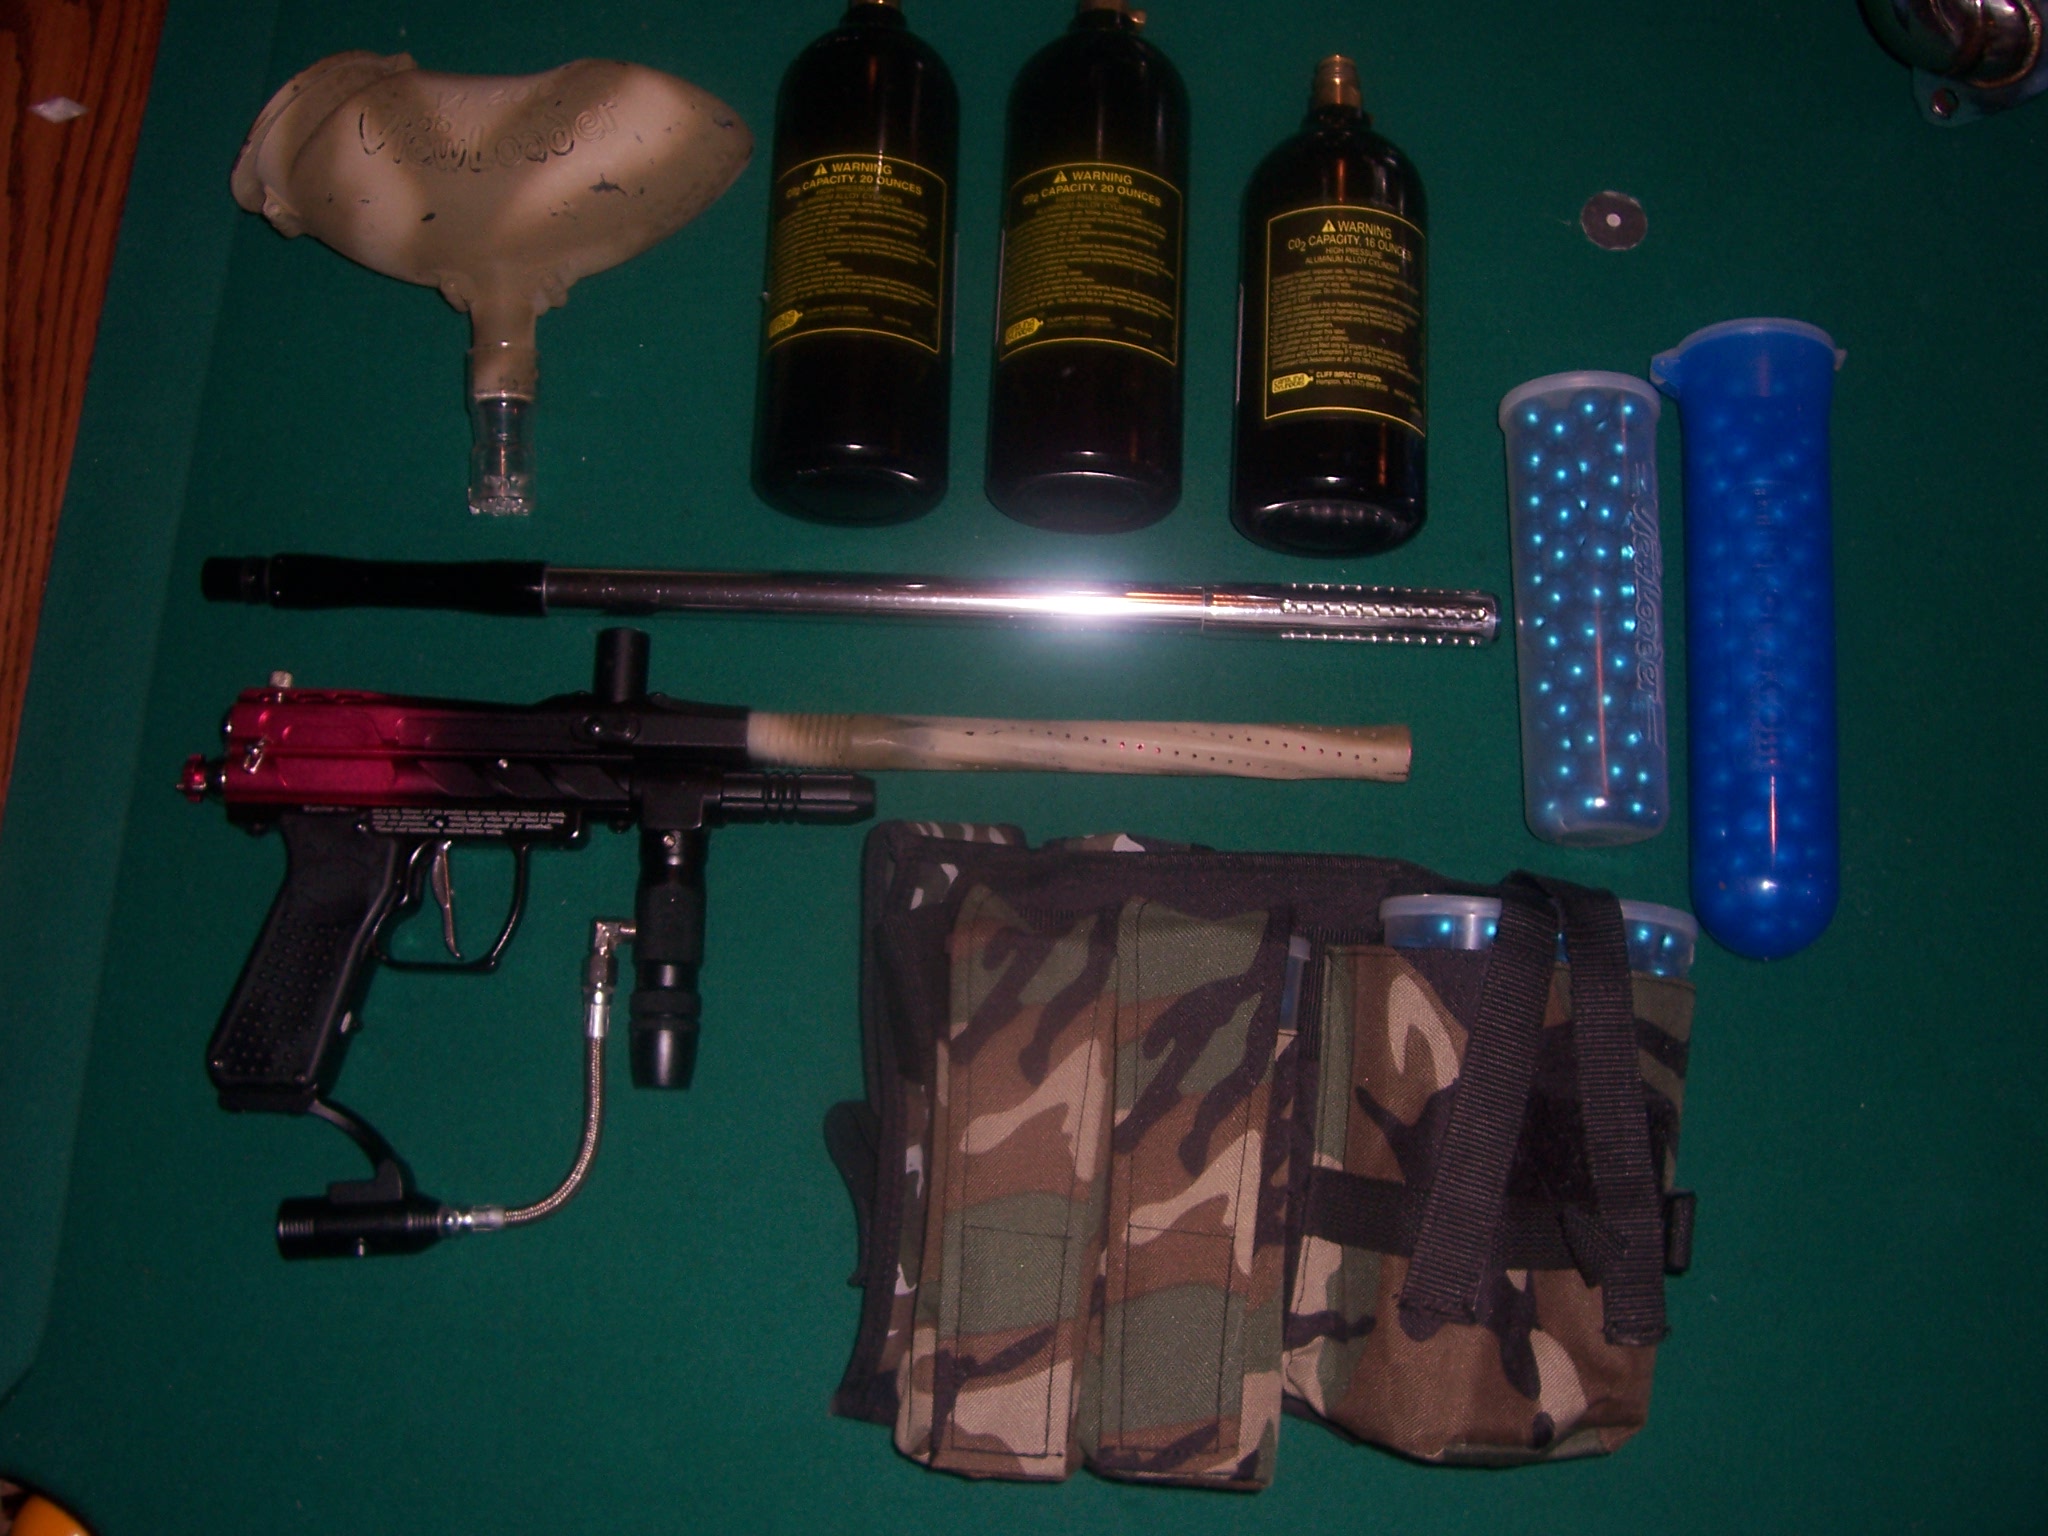 Spyder Semi/Full Auto Paintball Gun with Lots of Accessories - LS1TECH